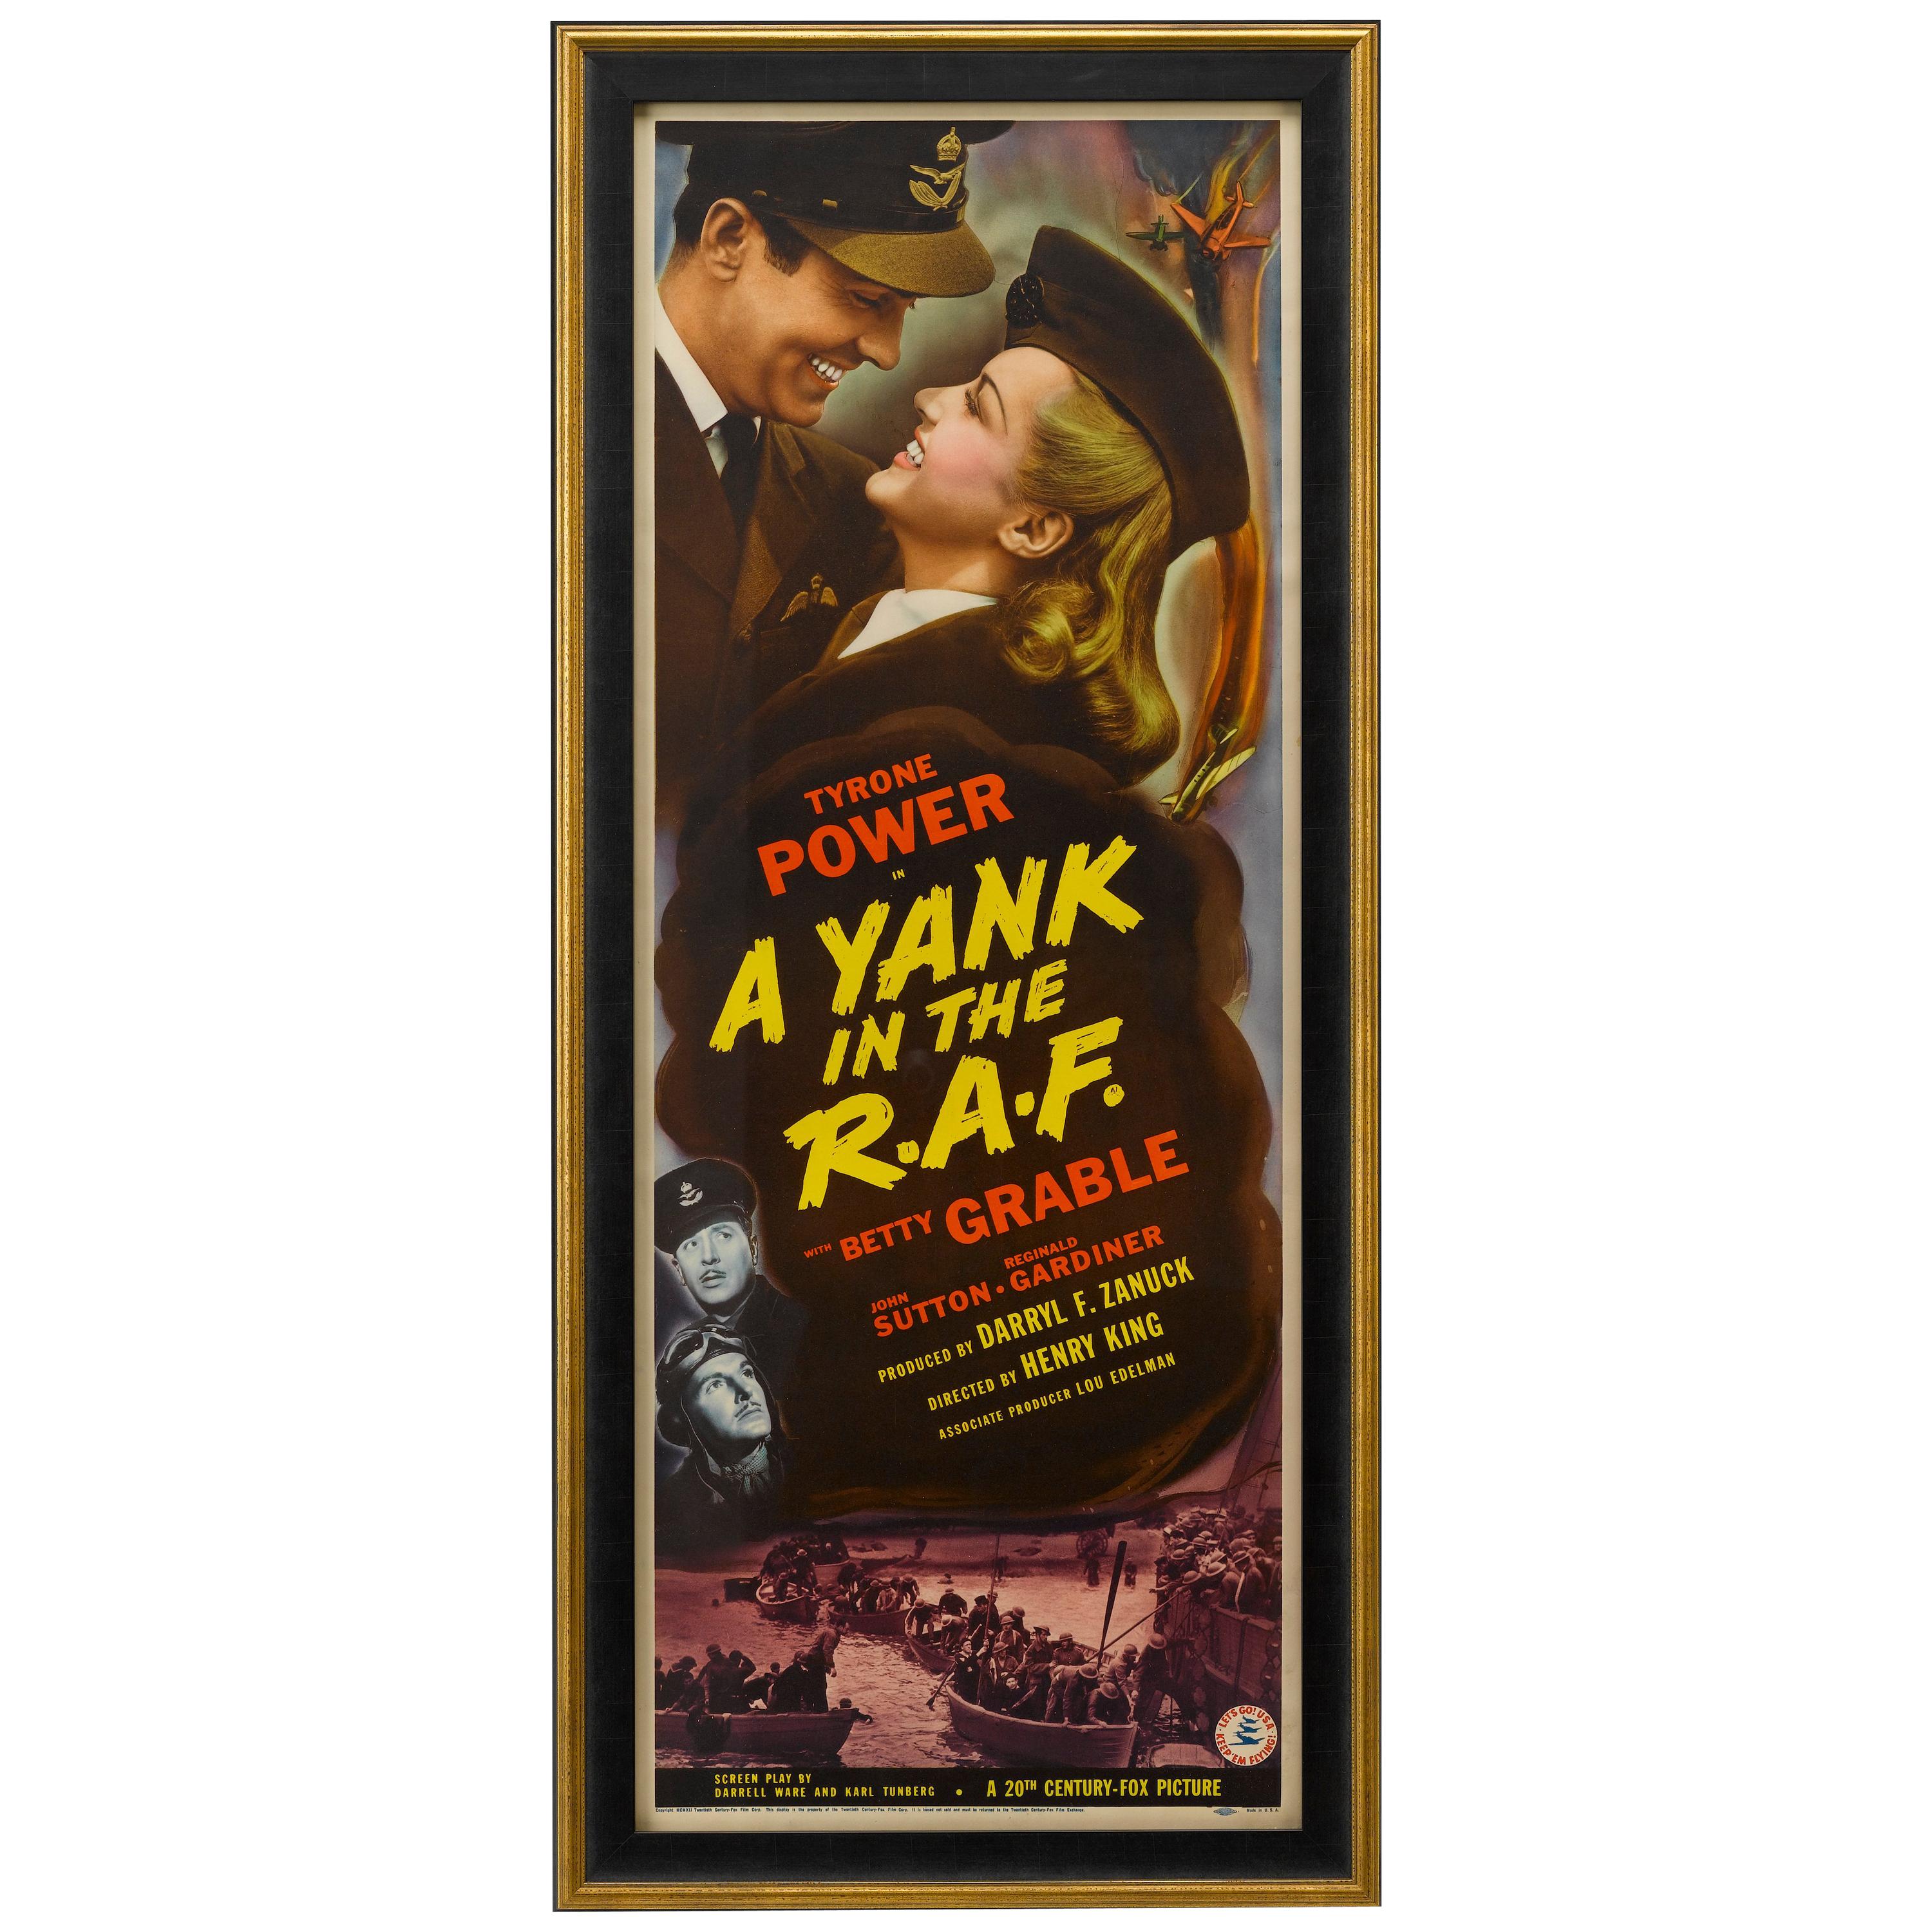 "A Yank in the R.A.F." Vintage Movie Poster, Circa 1941